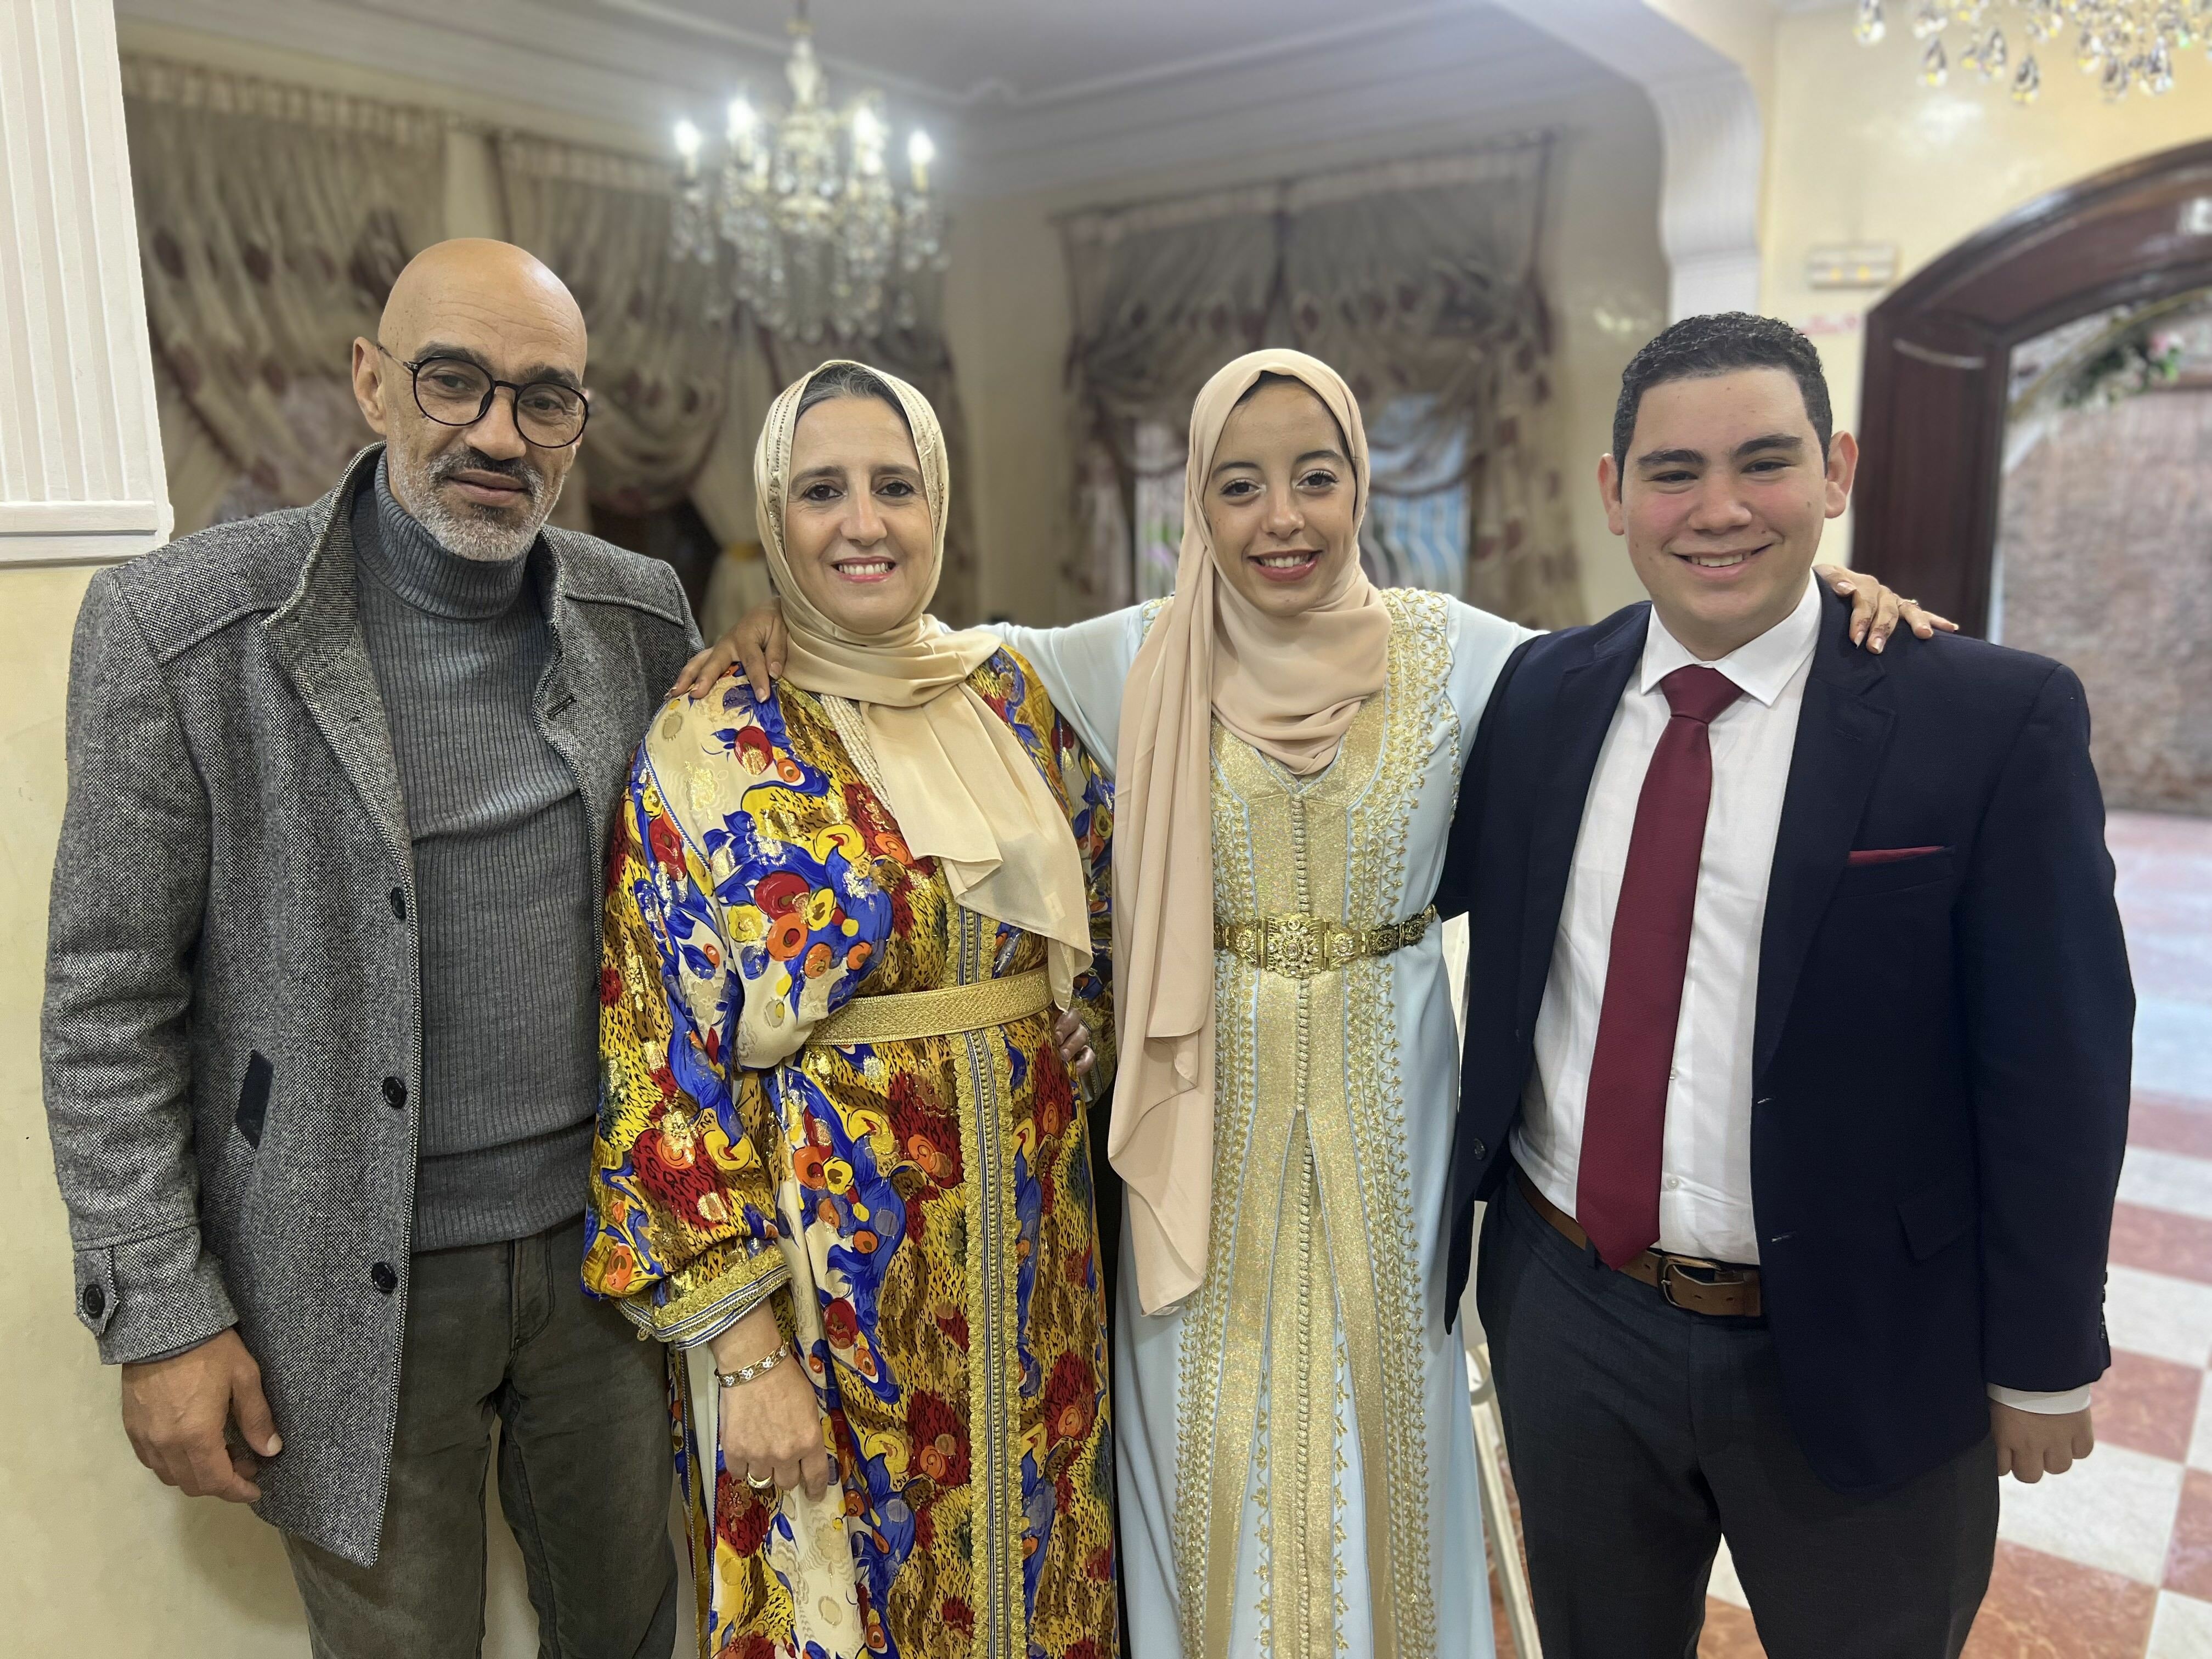 Isaac in a suit smiling in a group photo with host family, who are dressed in festive Moroccan clothing